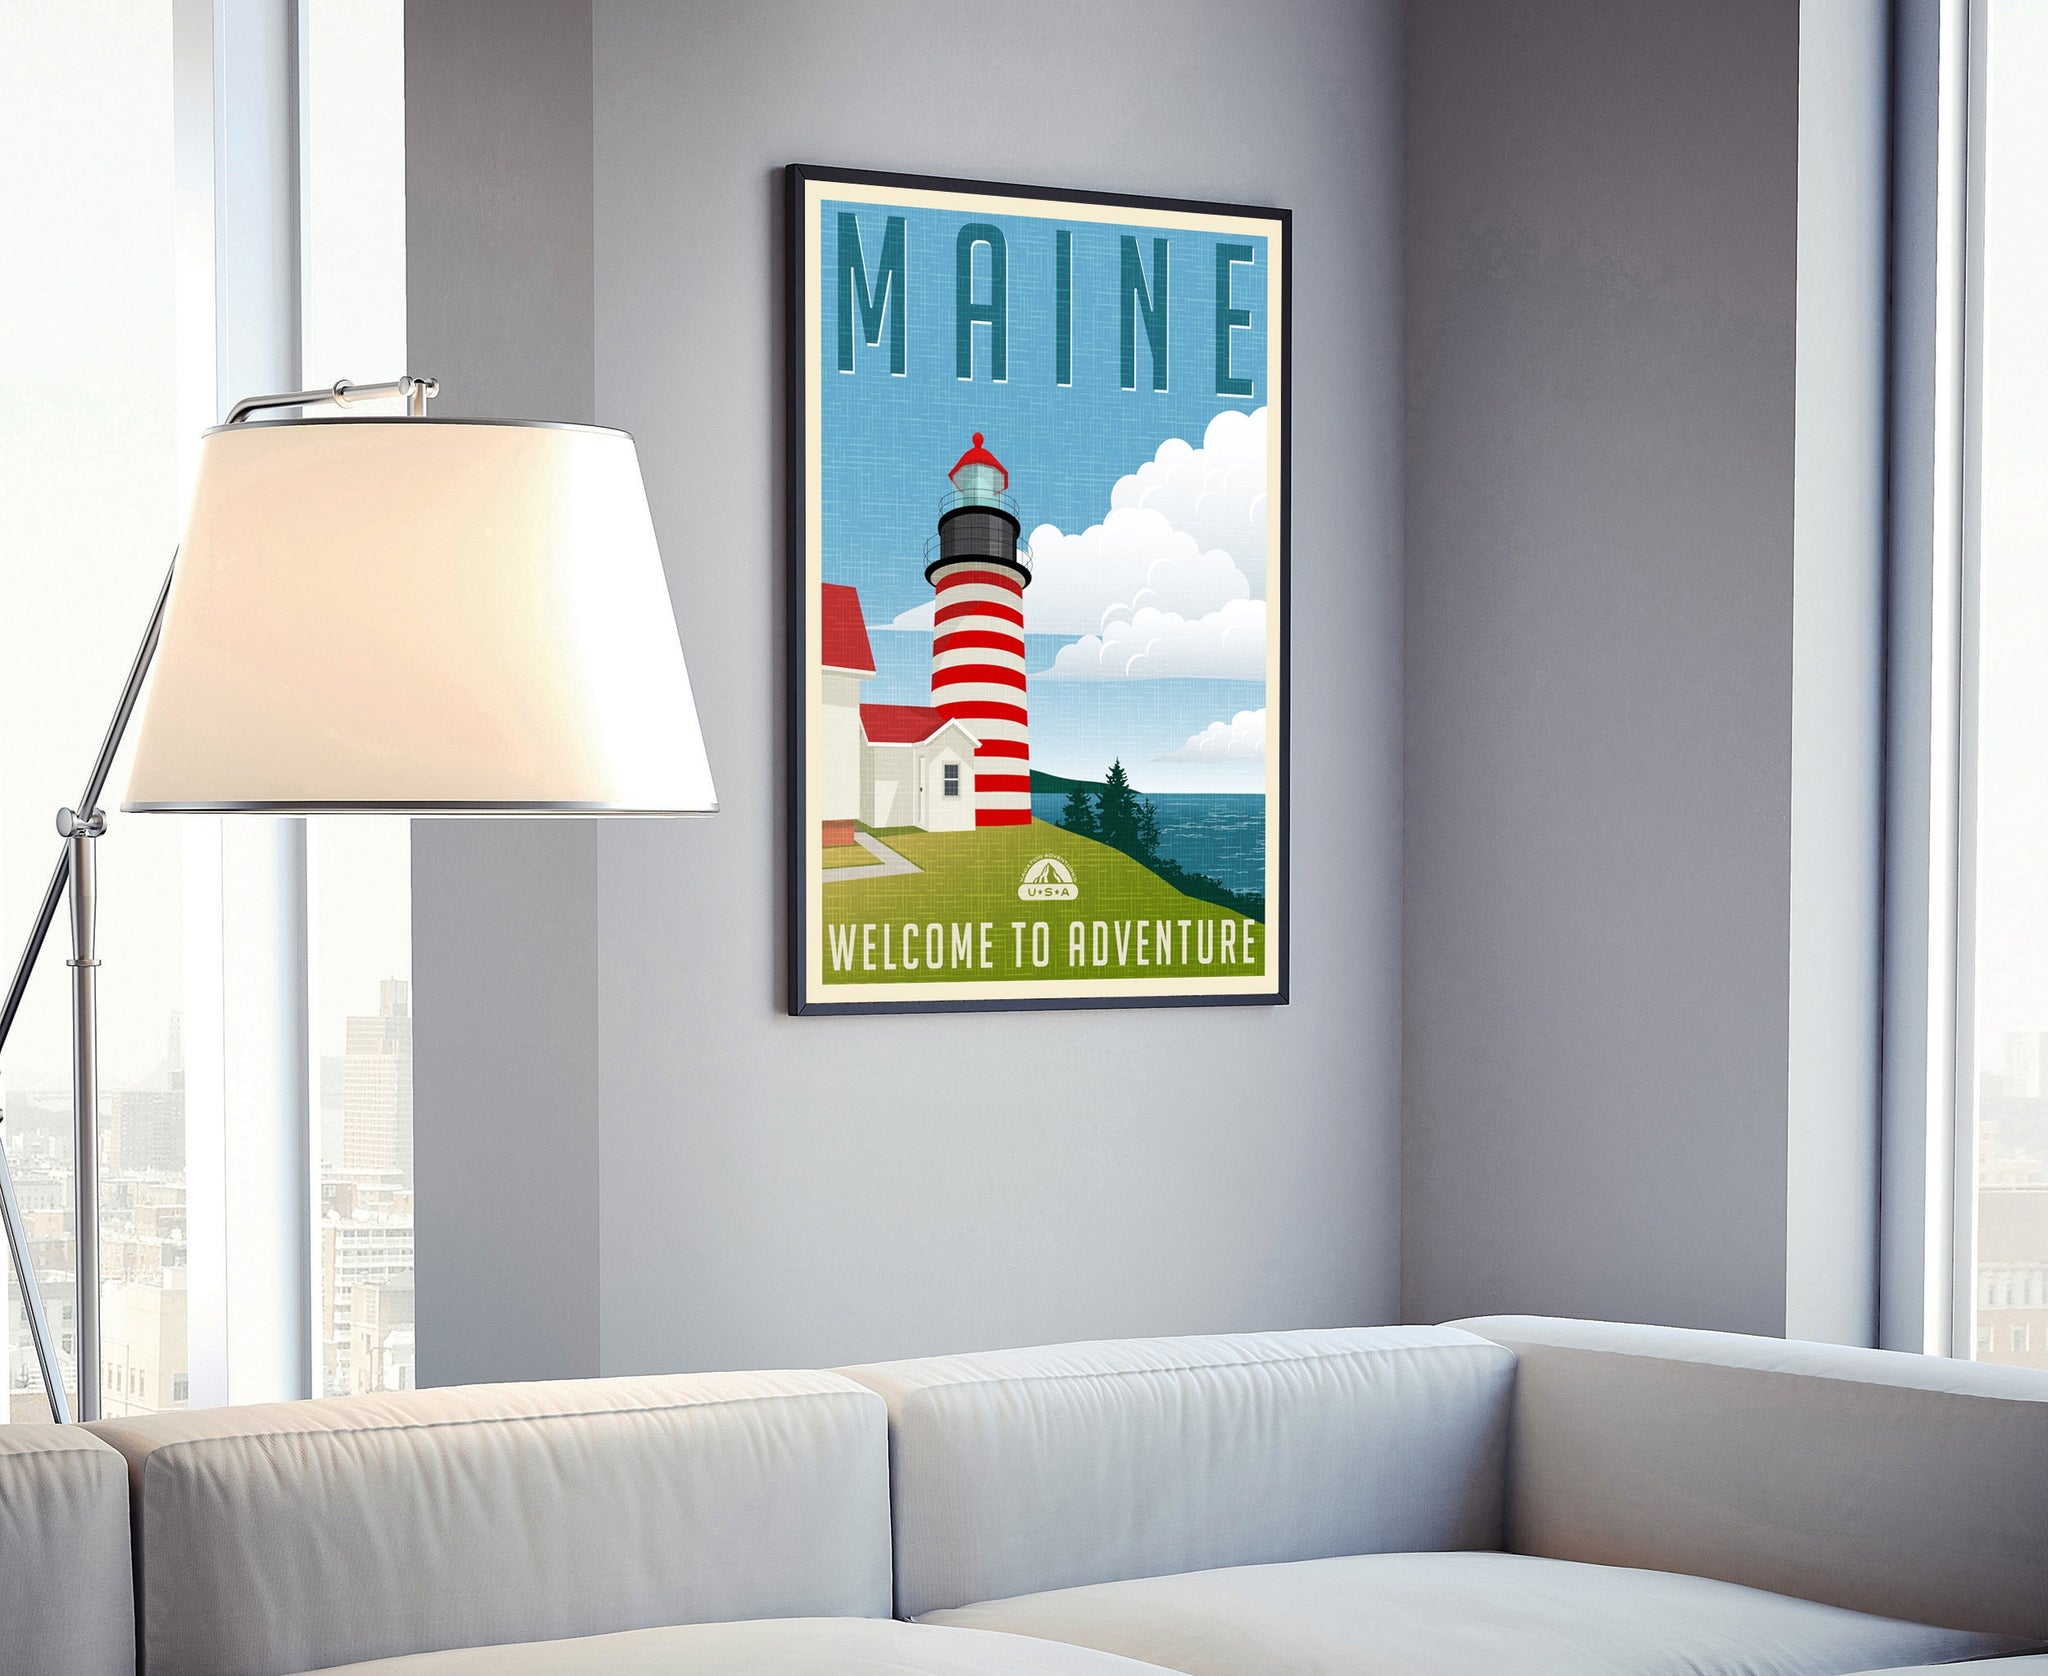 Vintage-Style Travel Posters, Maine Travel Decor